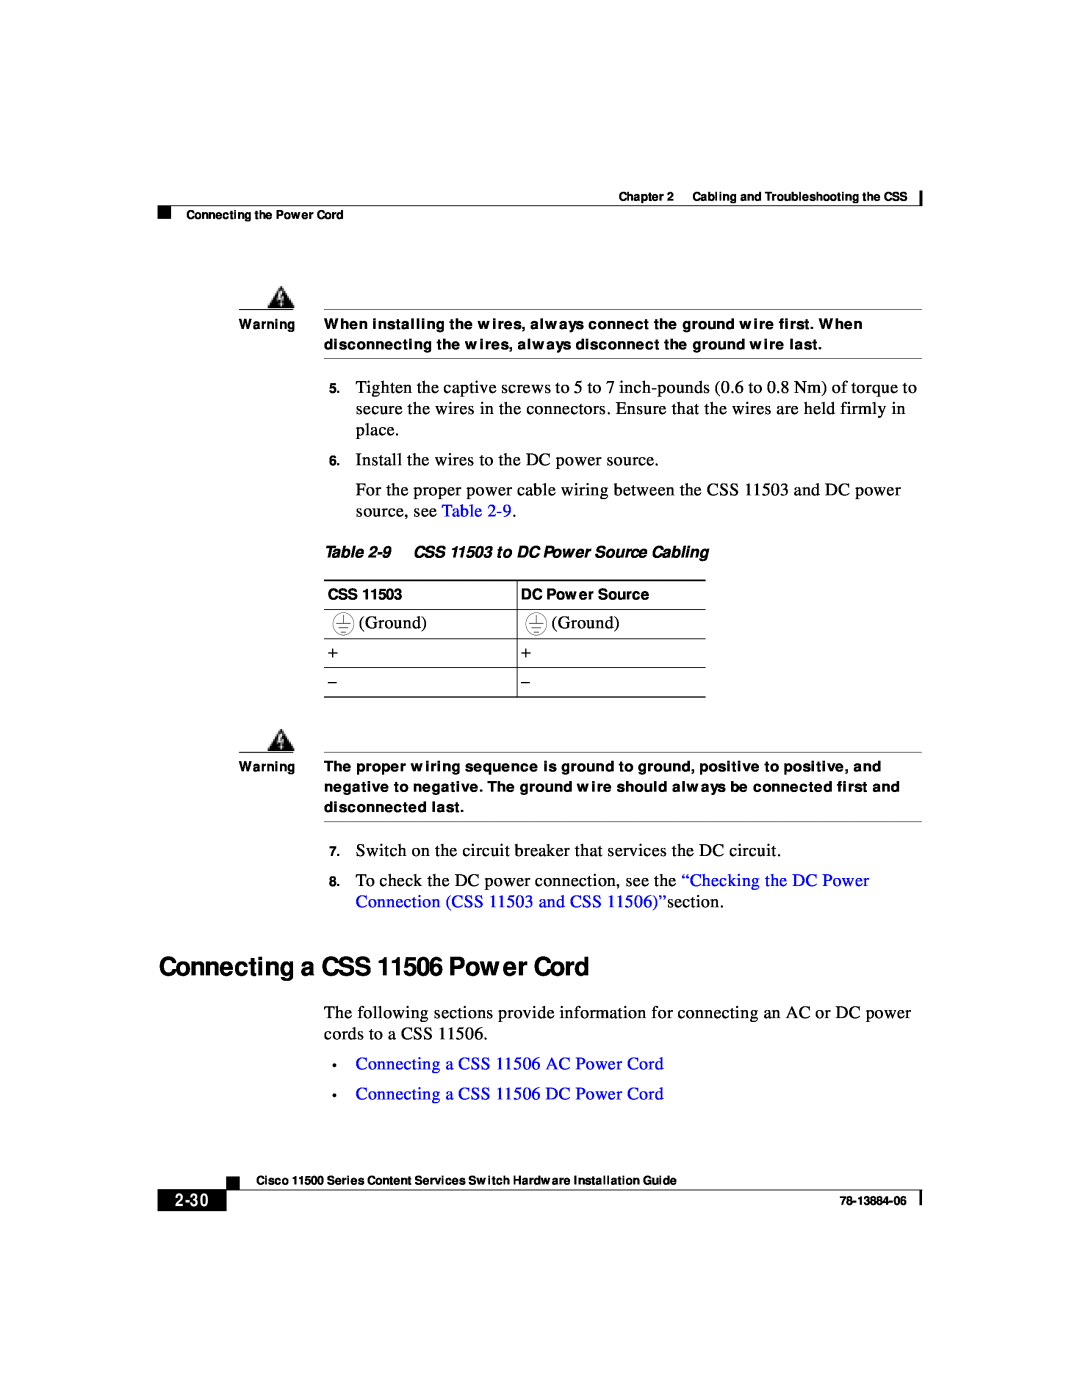 Cisco Systems 11500 Series manual Connecting a CSS 11506 Power Cord, Connecting a CSS 11506 AC Power Cord, 2-30 